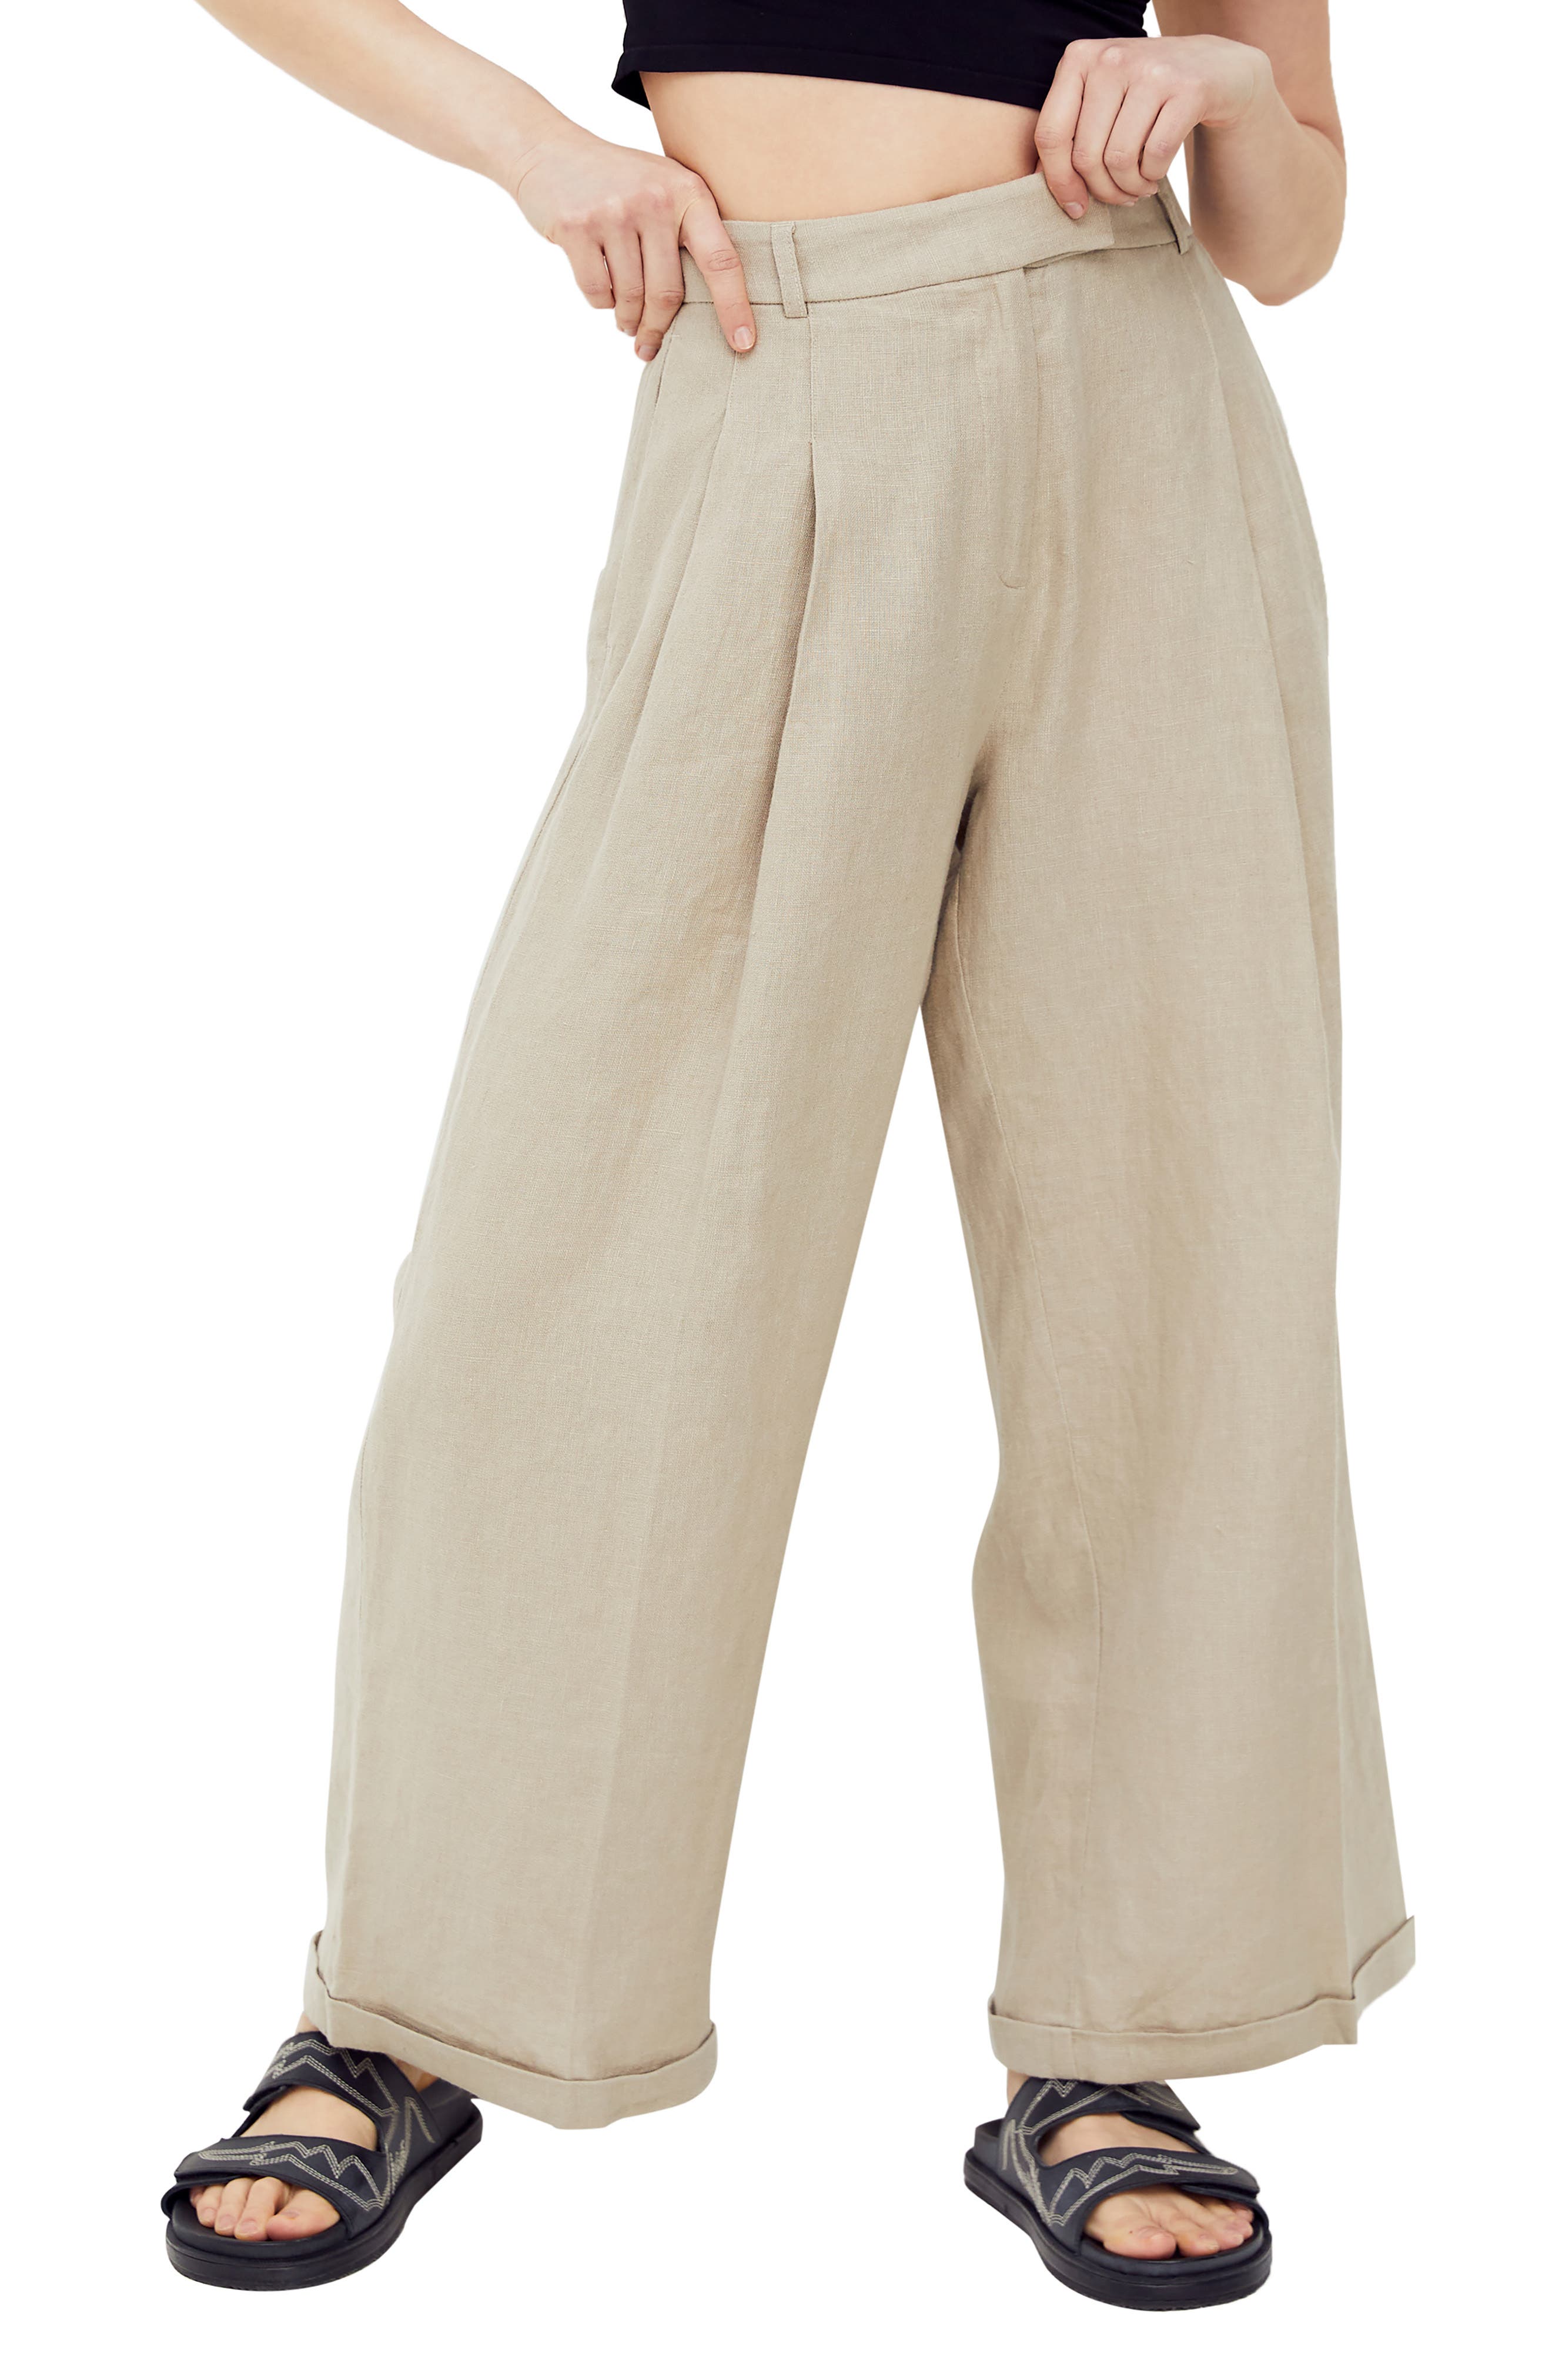 Natural Linen Pants with mini front pockets Flare legs pants Black Color Natural Linen Black Linen